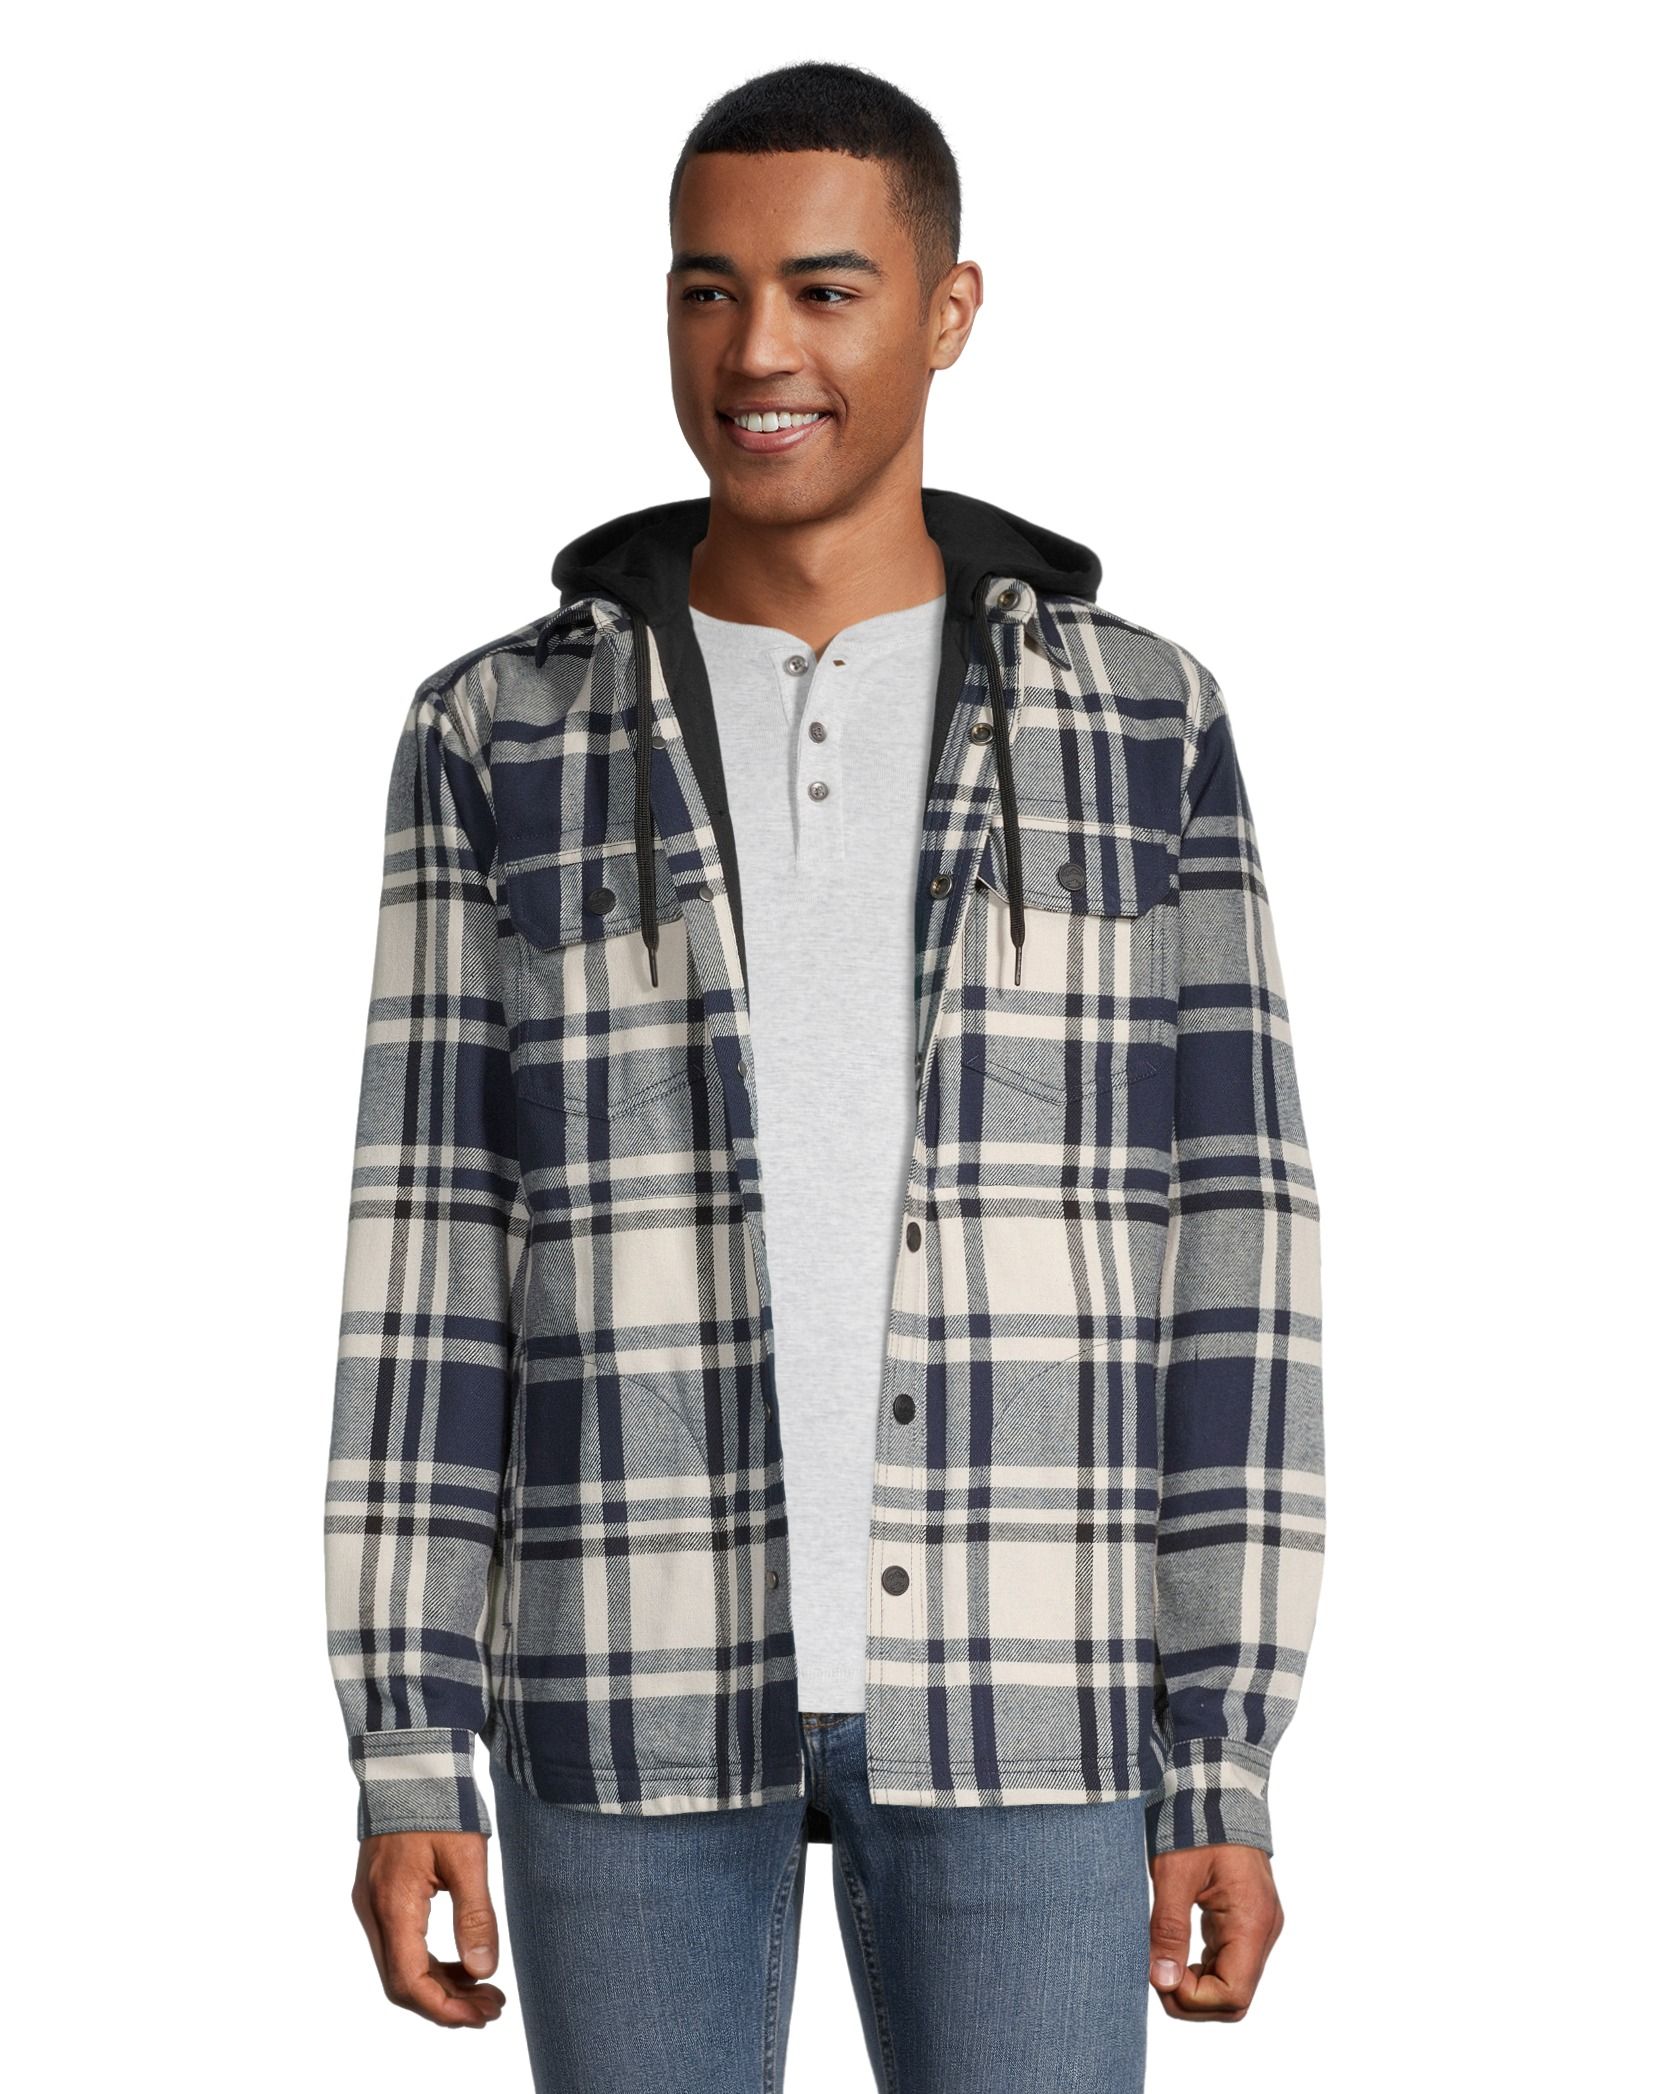 M New Plaid Flannel Shacket Shirt Jacket Button Front Top Coat